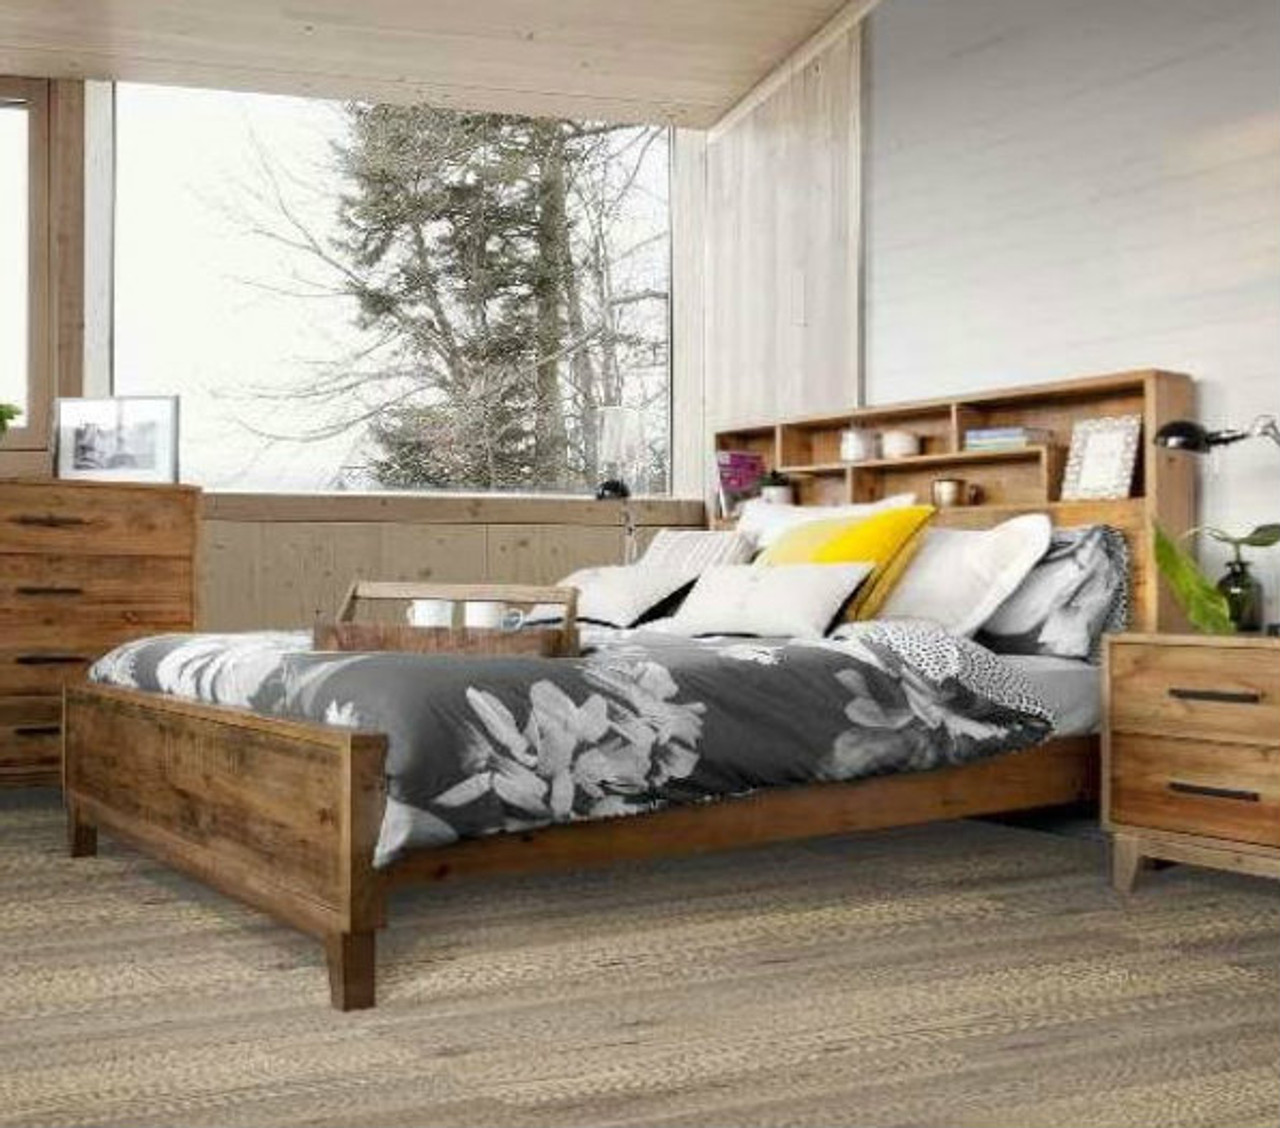 King Single Frobe Bed With Bookcase Headboard Rustic